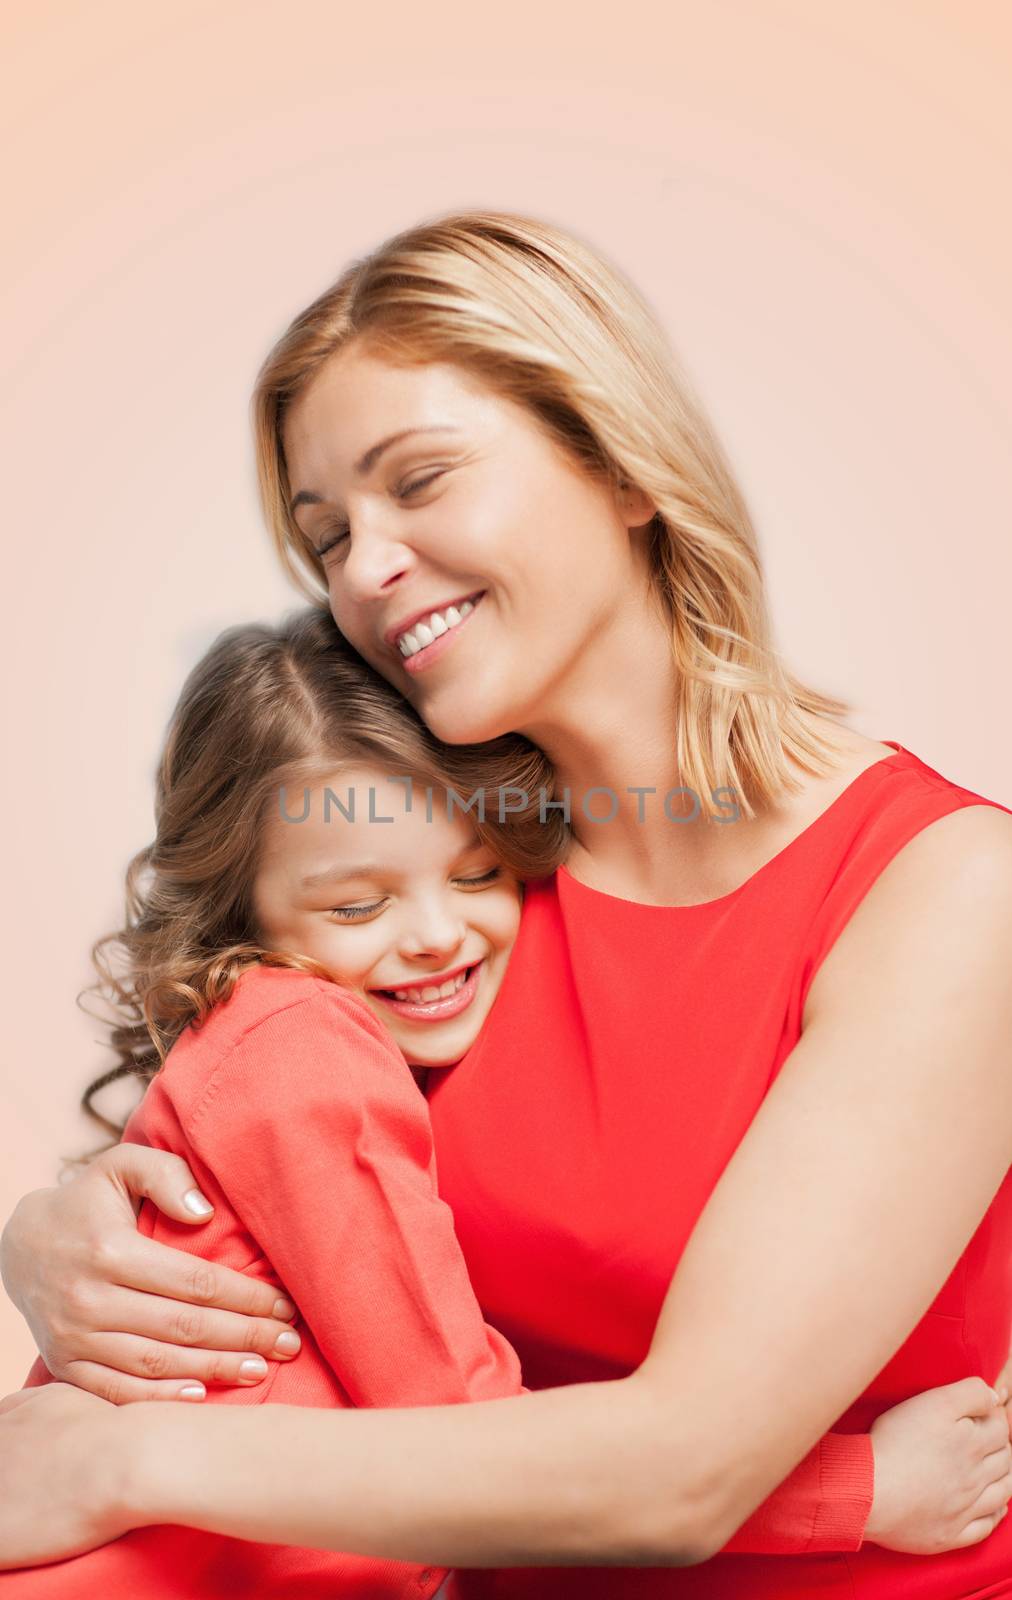 family, child and happiness concept - hugging mother and daughter